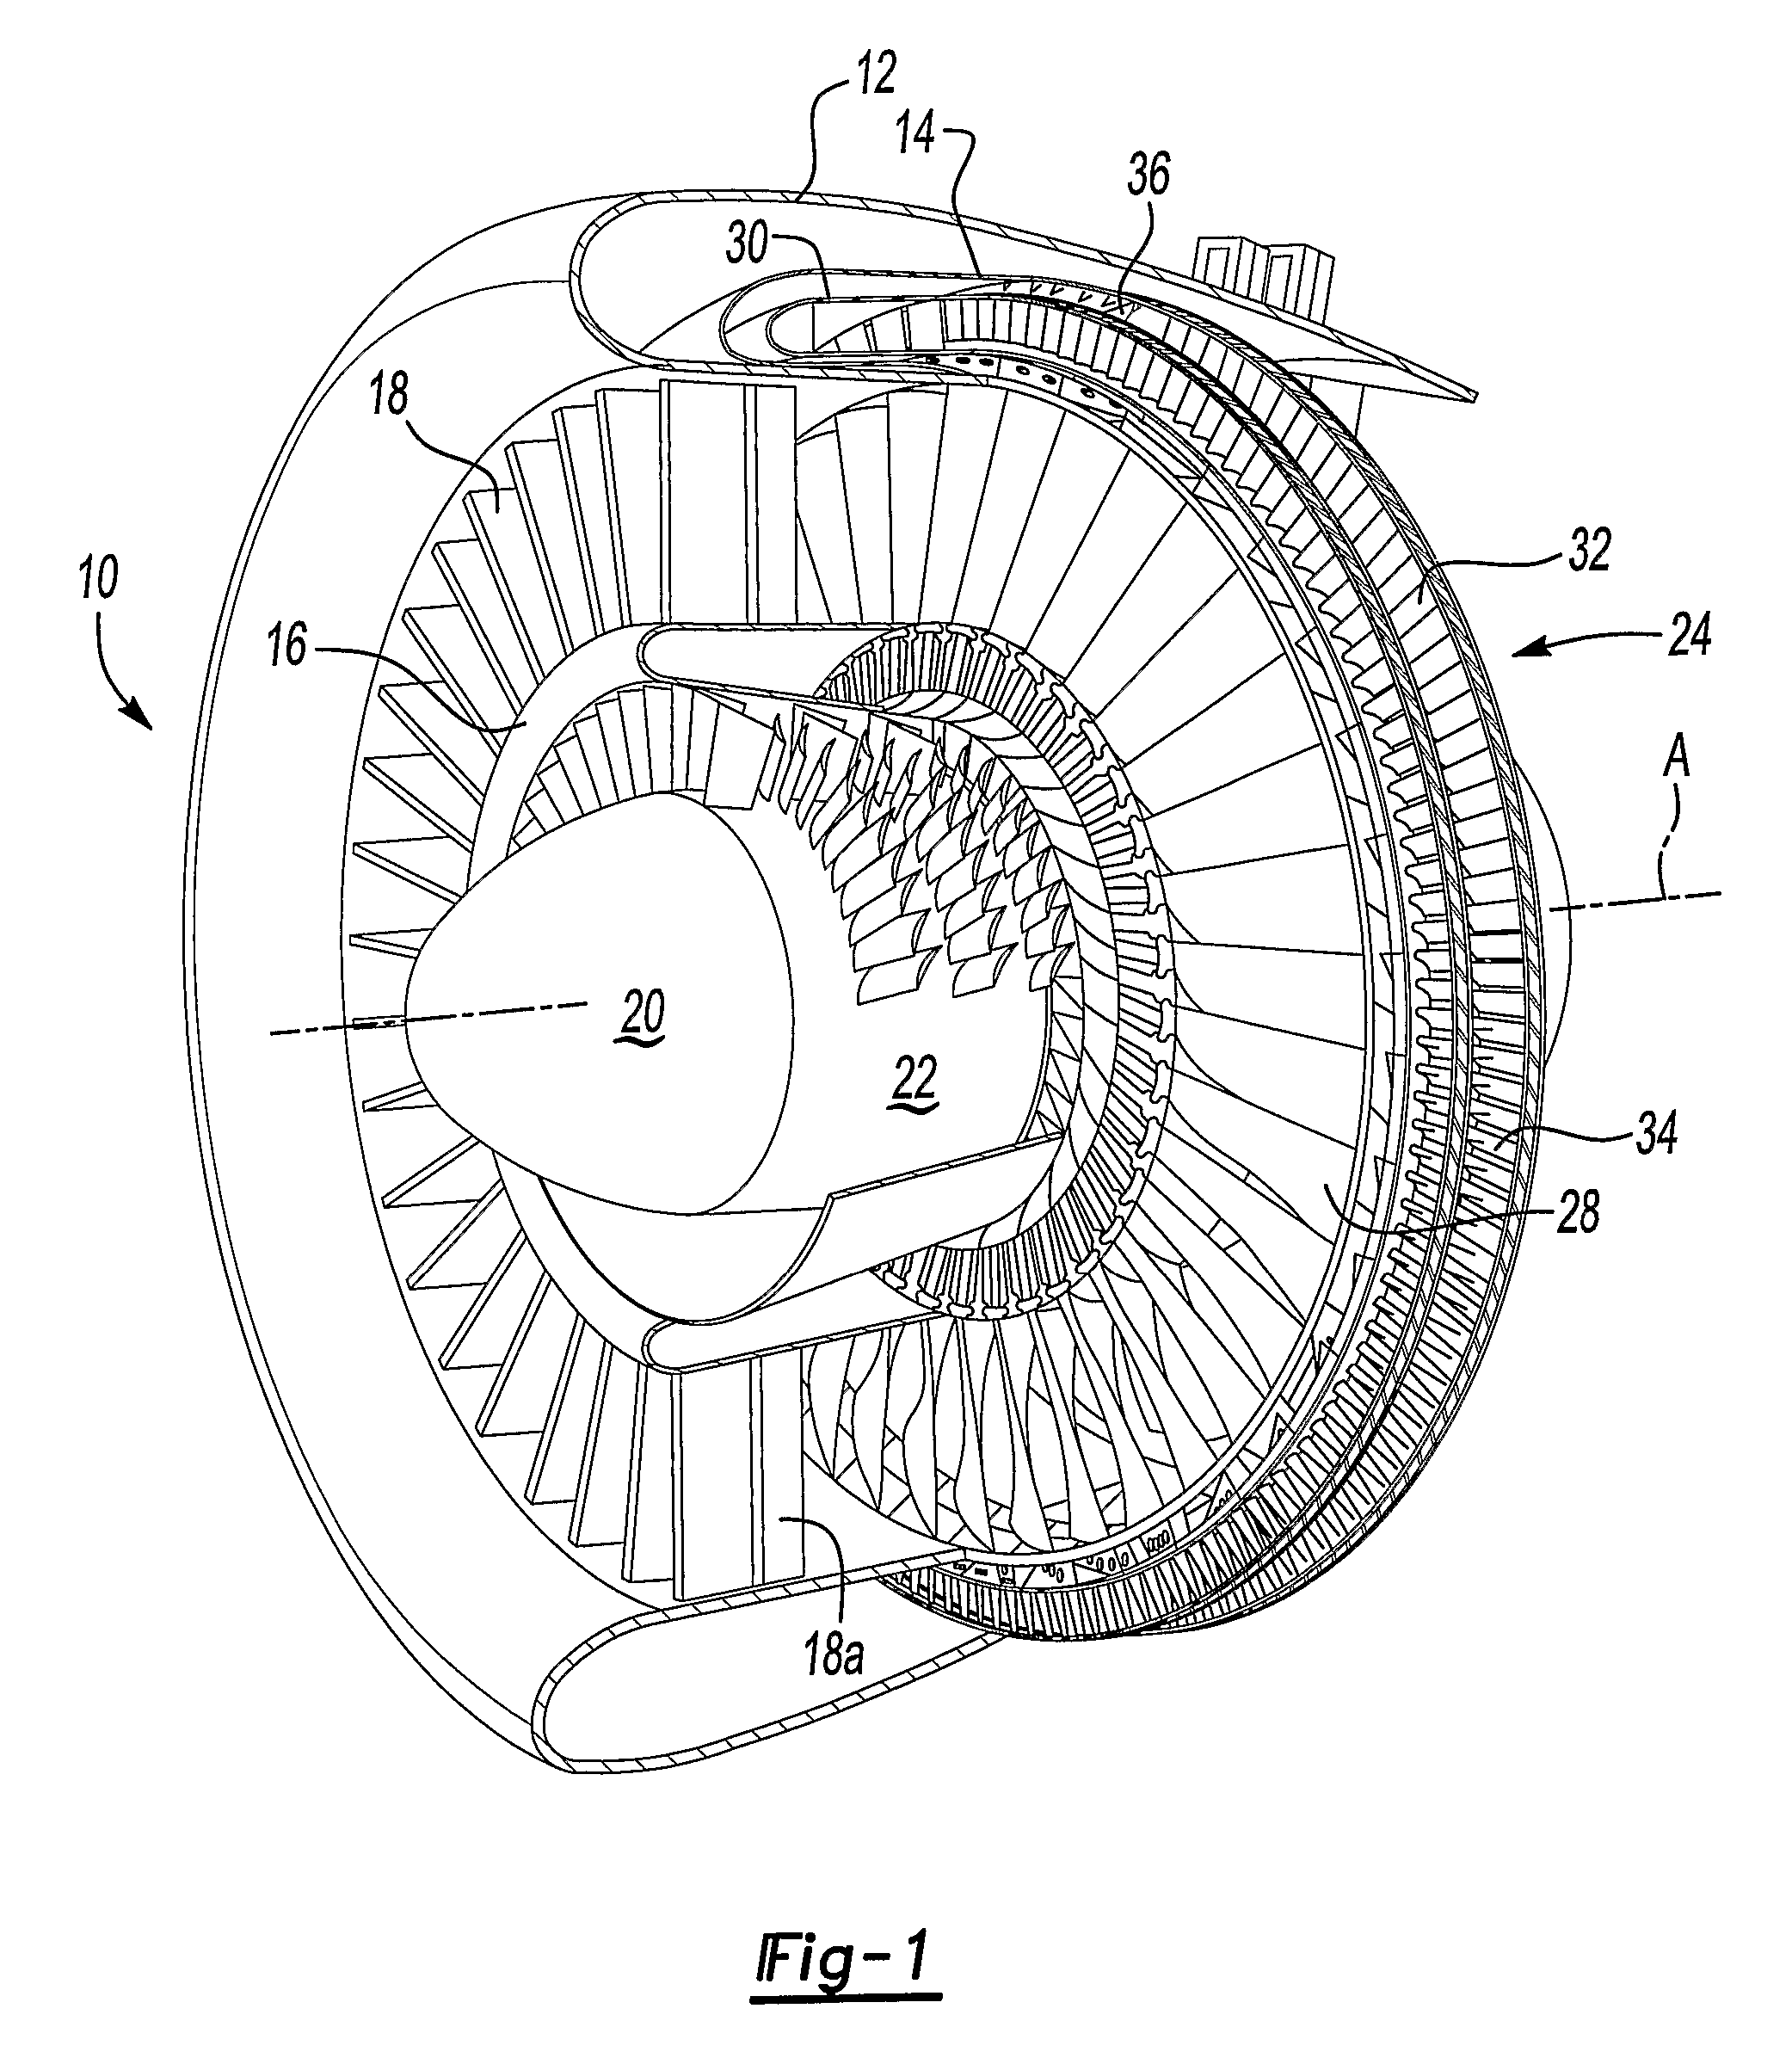 Hydraulic seal for a gearbox of a tip turbine engine